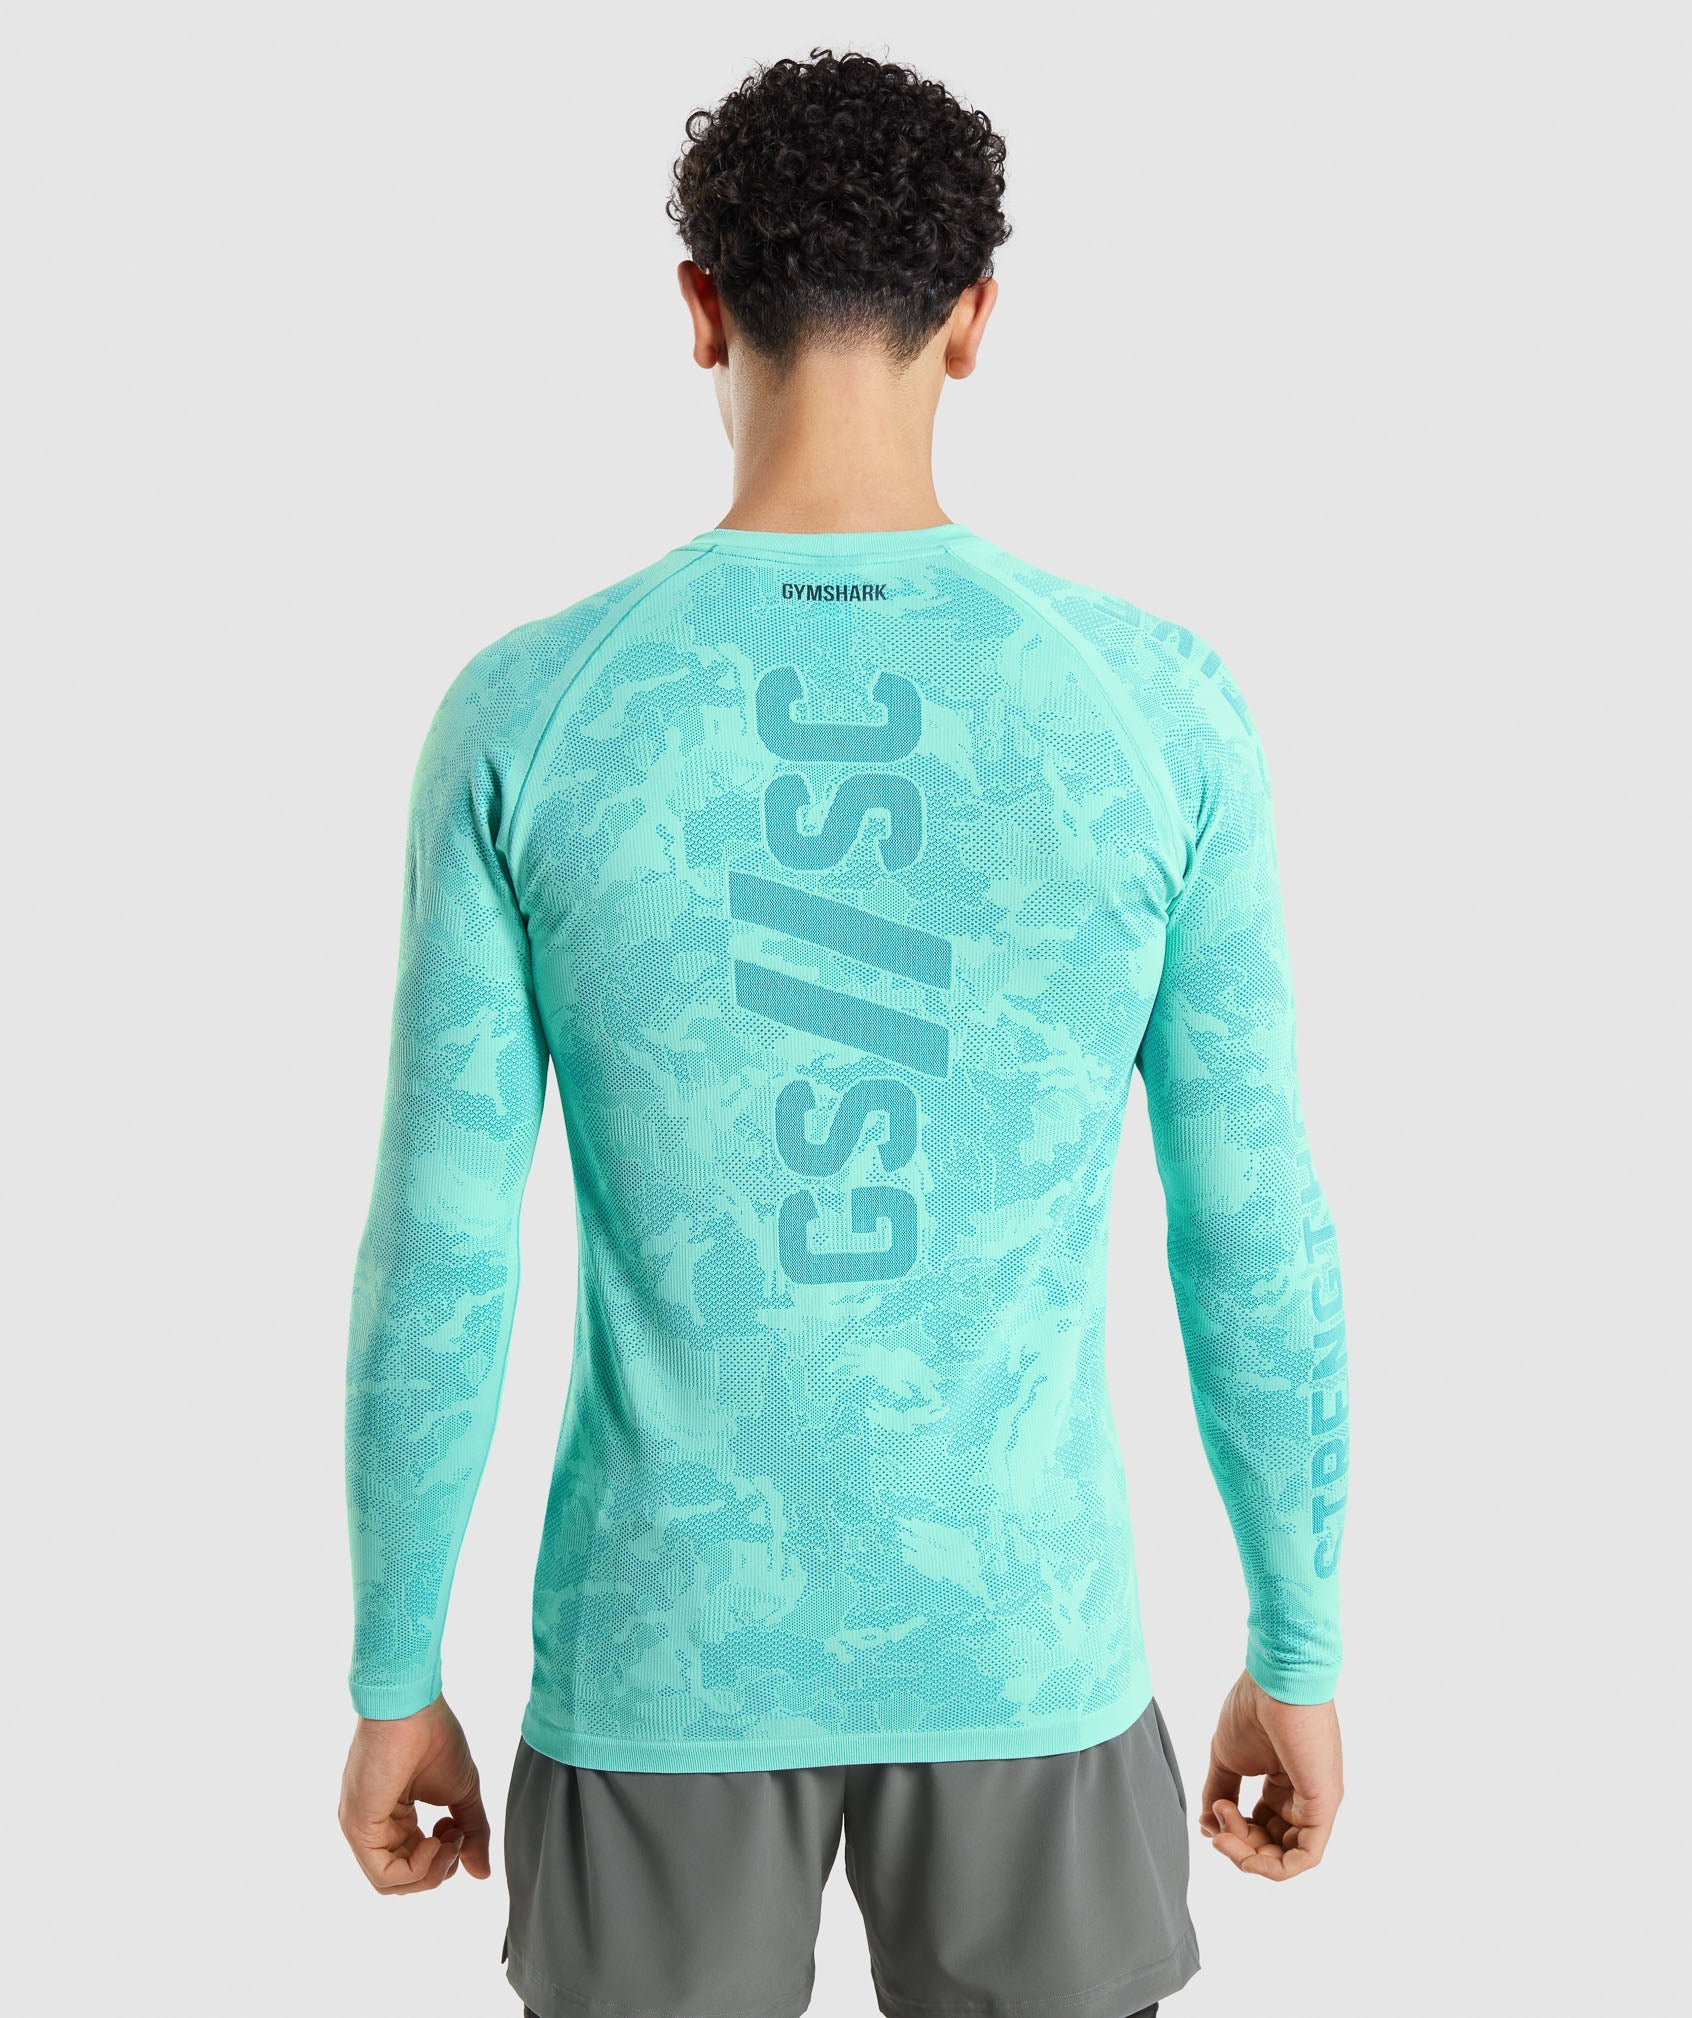 Gymshark//Steve Cook Long Sleeve Seamless T-Shirt in Bright Turquoise/Atlas Blue - view 1